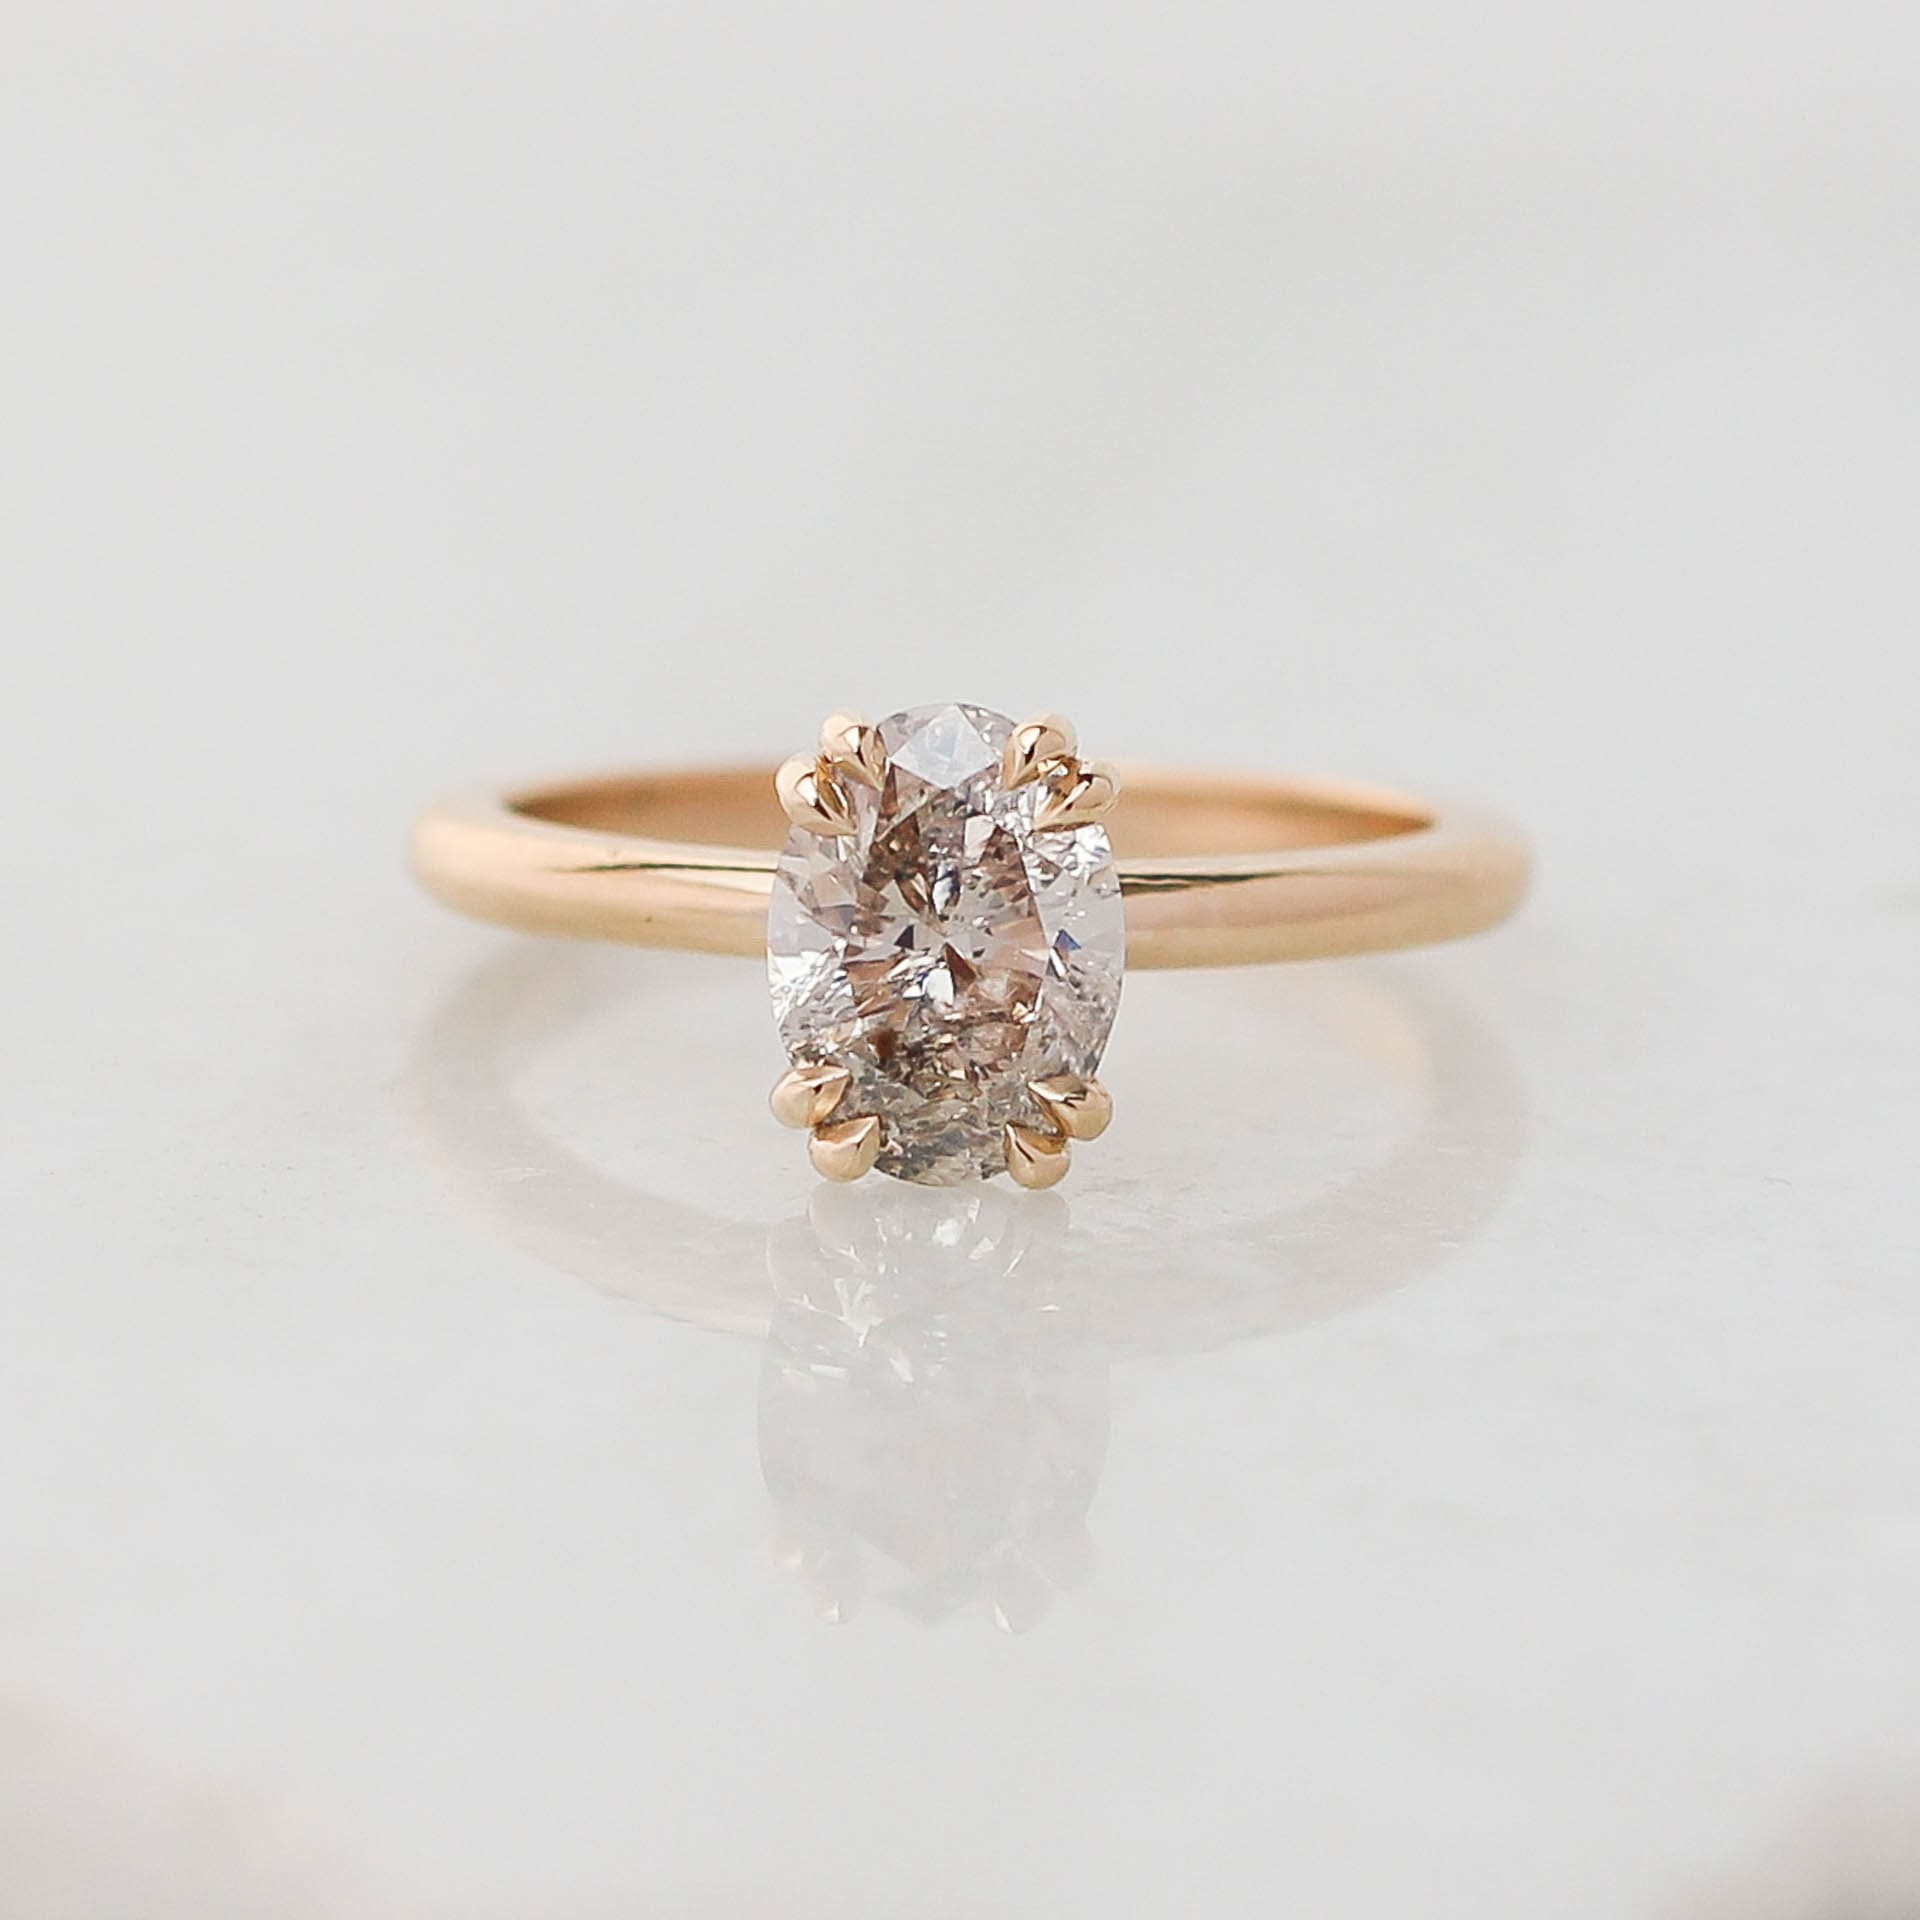 Oval champagne diamond ring